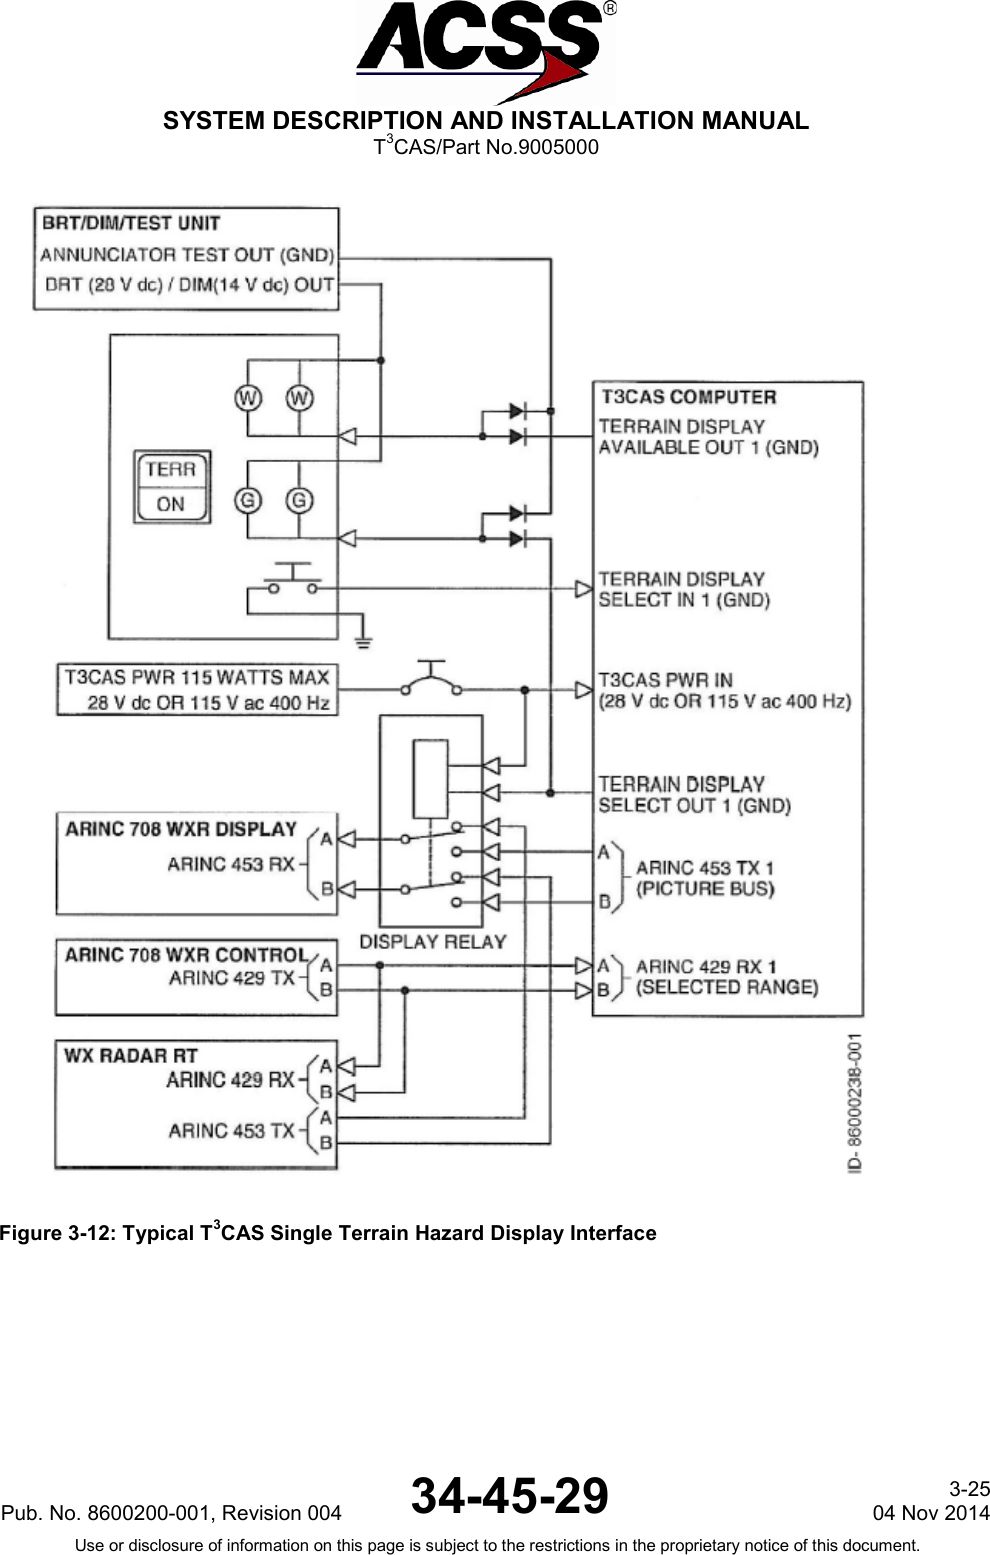  SYSTEM DESCRIPTION AND INSTALLATION MANUAL T3CAS/Part No.9005000  Figure 3-12: Typical T3CAS Single Terrain Hazard Display Interface Pub. No. 8600200-001, Revision 004  34-45-29 3-25 04 Nov 2014 Use or disclosure of information on this page is subject to the restrictions in the proprietary notice of this document.   